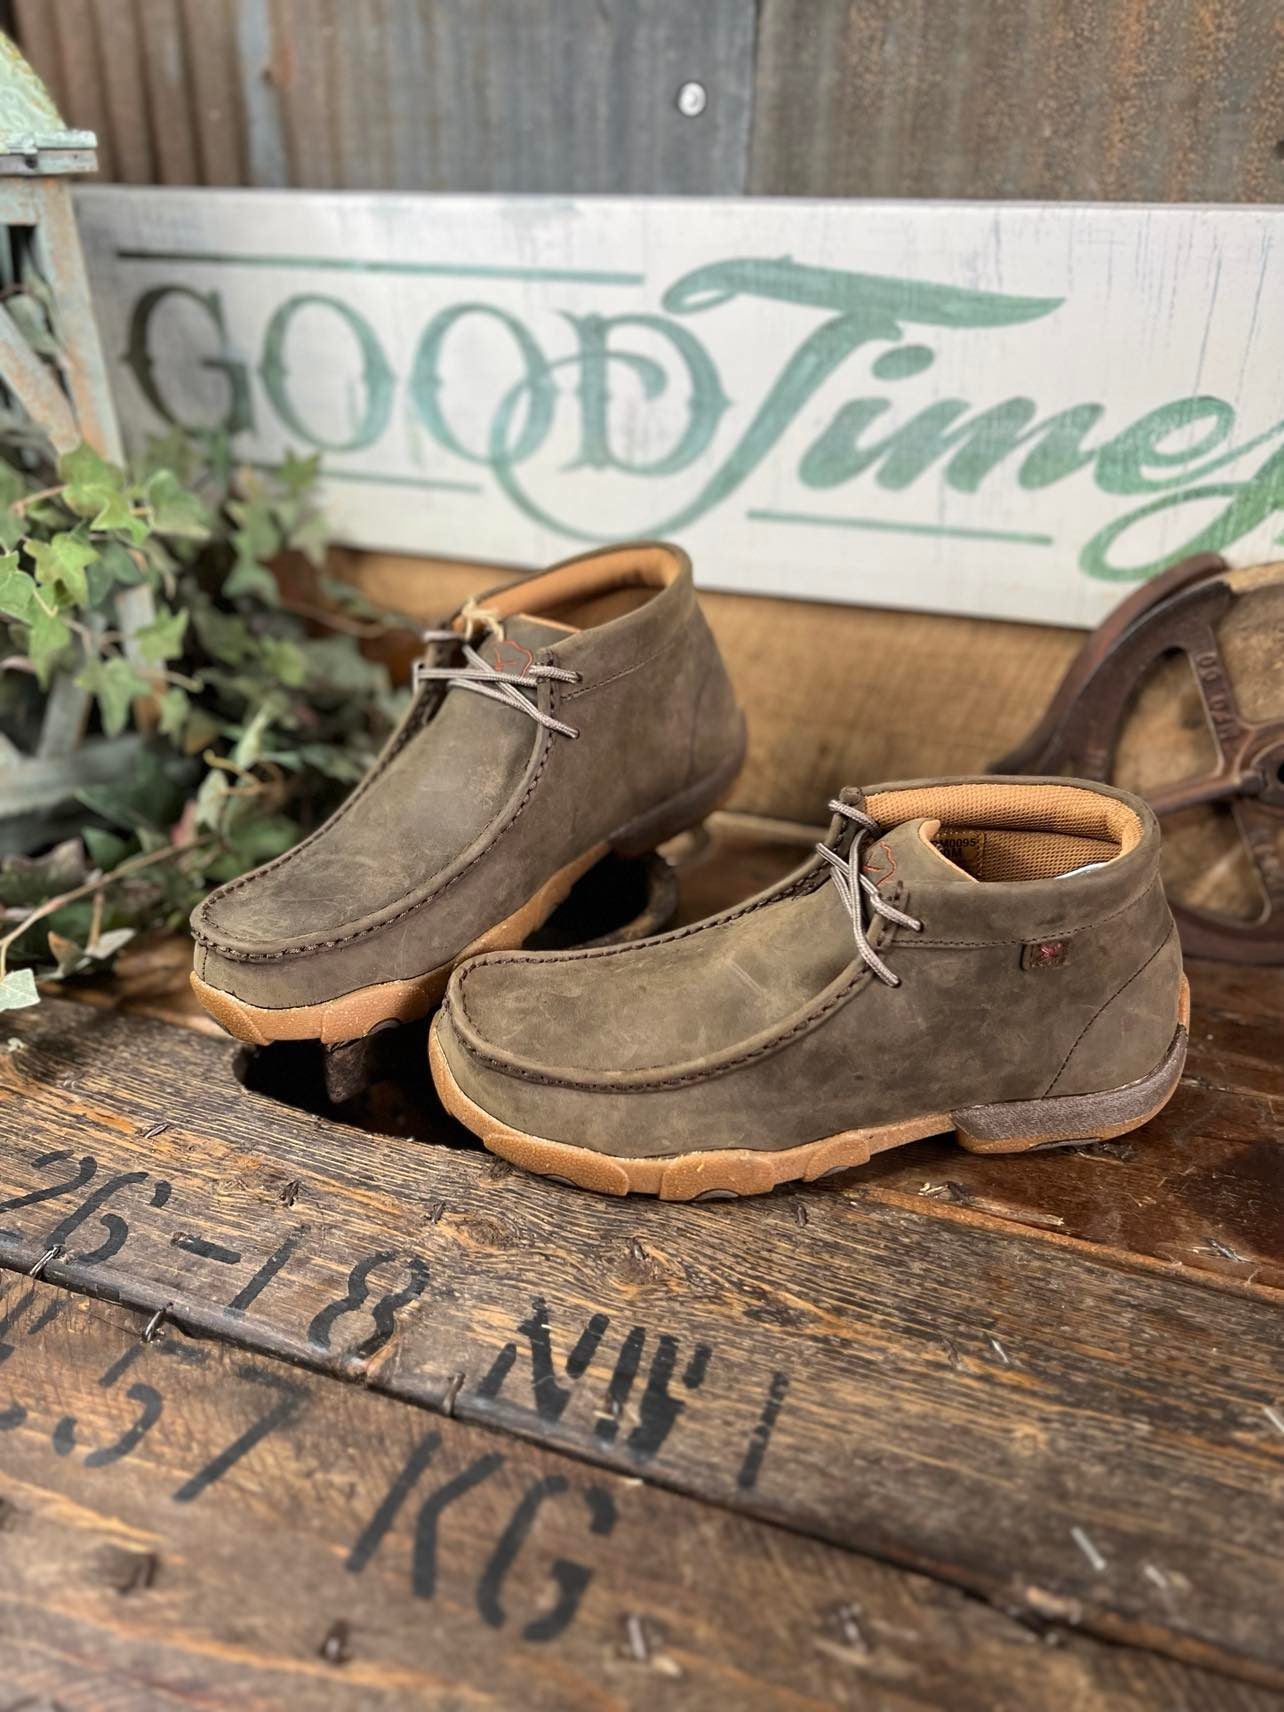 Twisted X Men's Shitake Chukka Driving Moc *FINAL SALE*-Men's Casual Shoes-Twisted X Boots-Lucky J Boots & More, Women's, Men's, & Kids Western Store Located in Carthage, MO